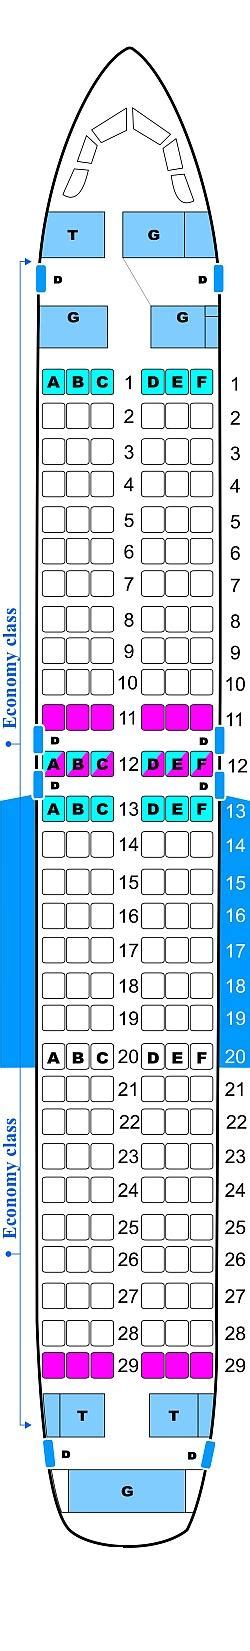 Airbus A Seating